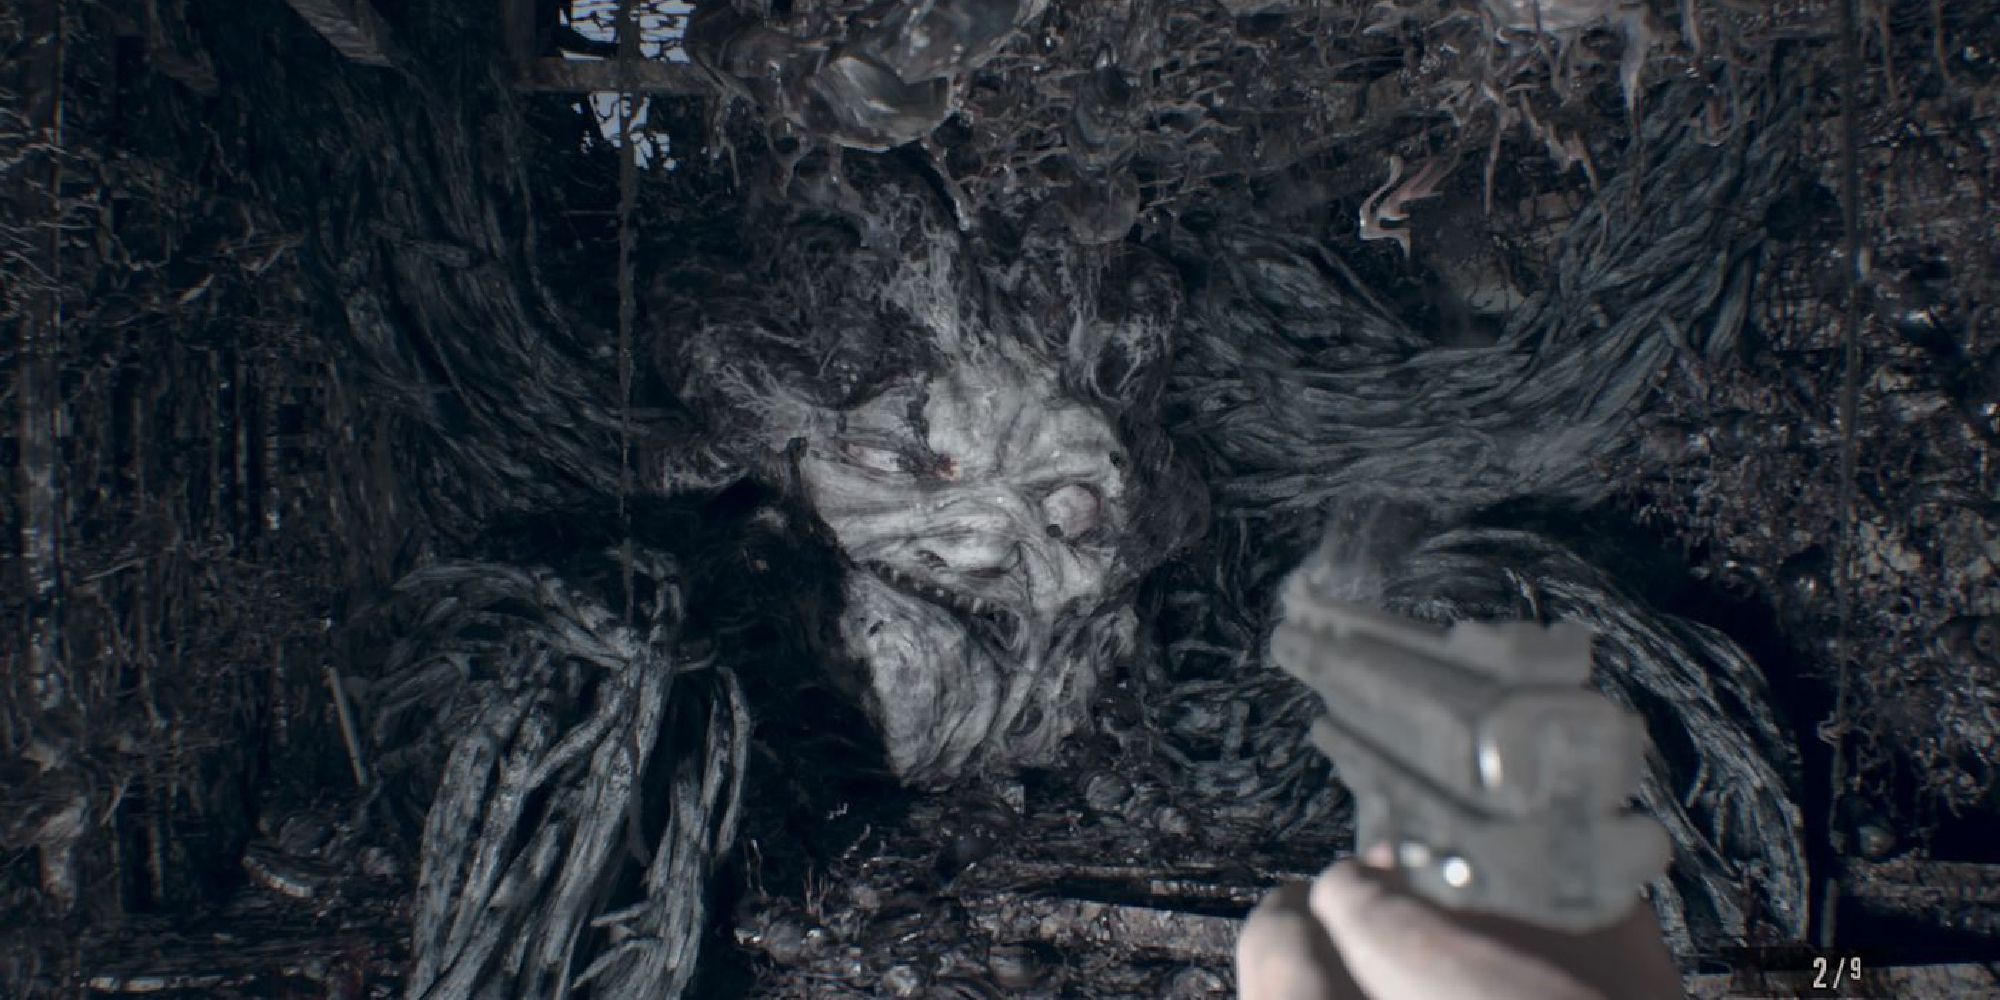 Eveline in her final mold form in Resident Evil 7.